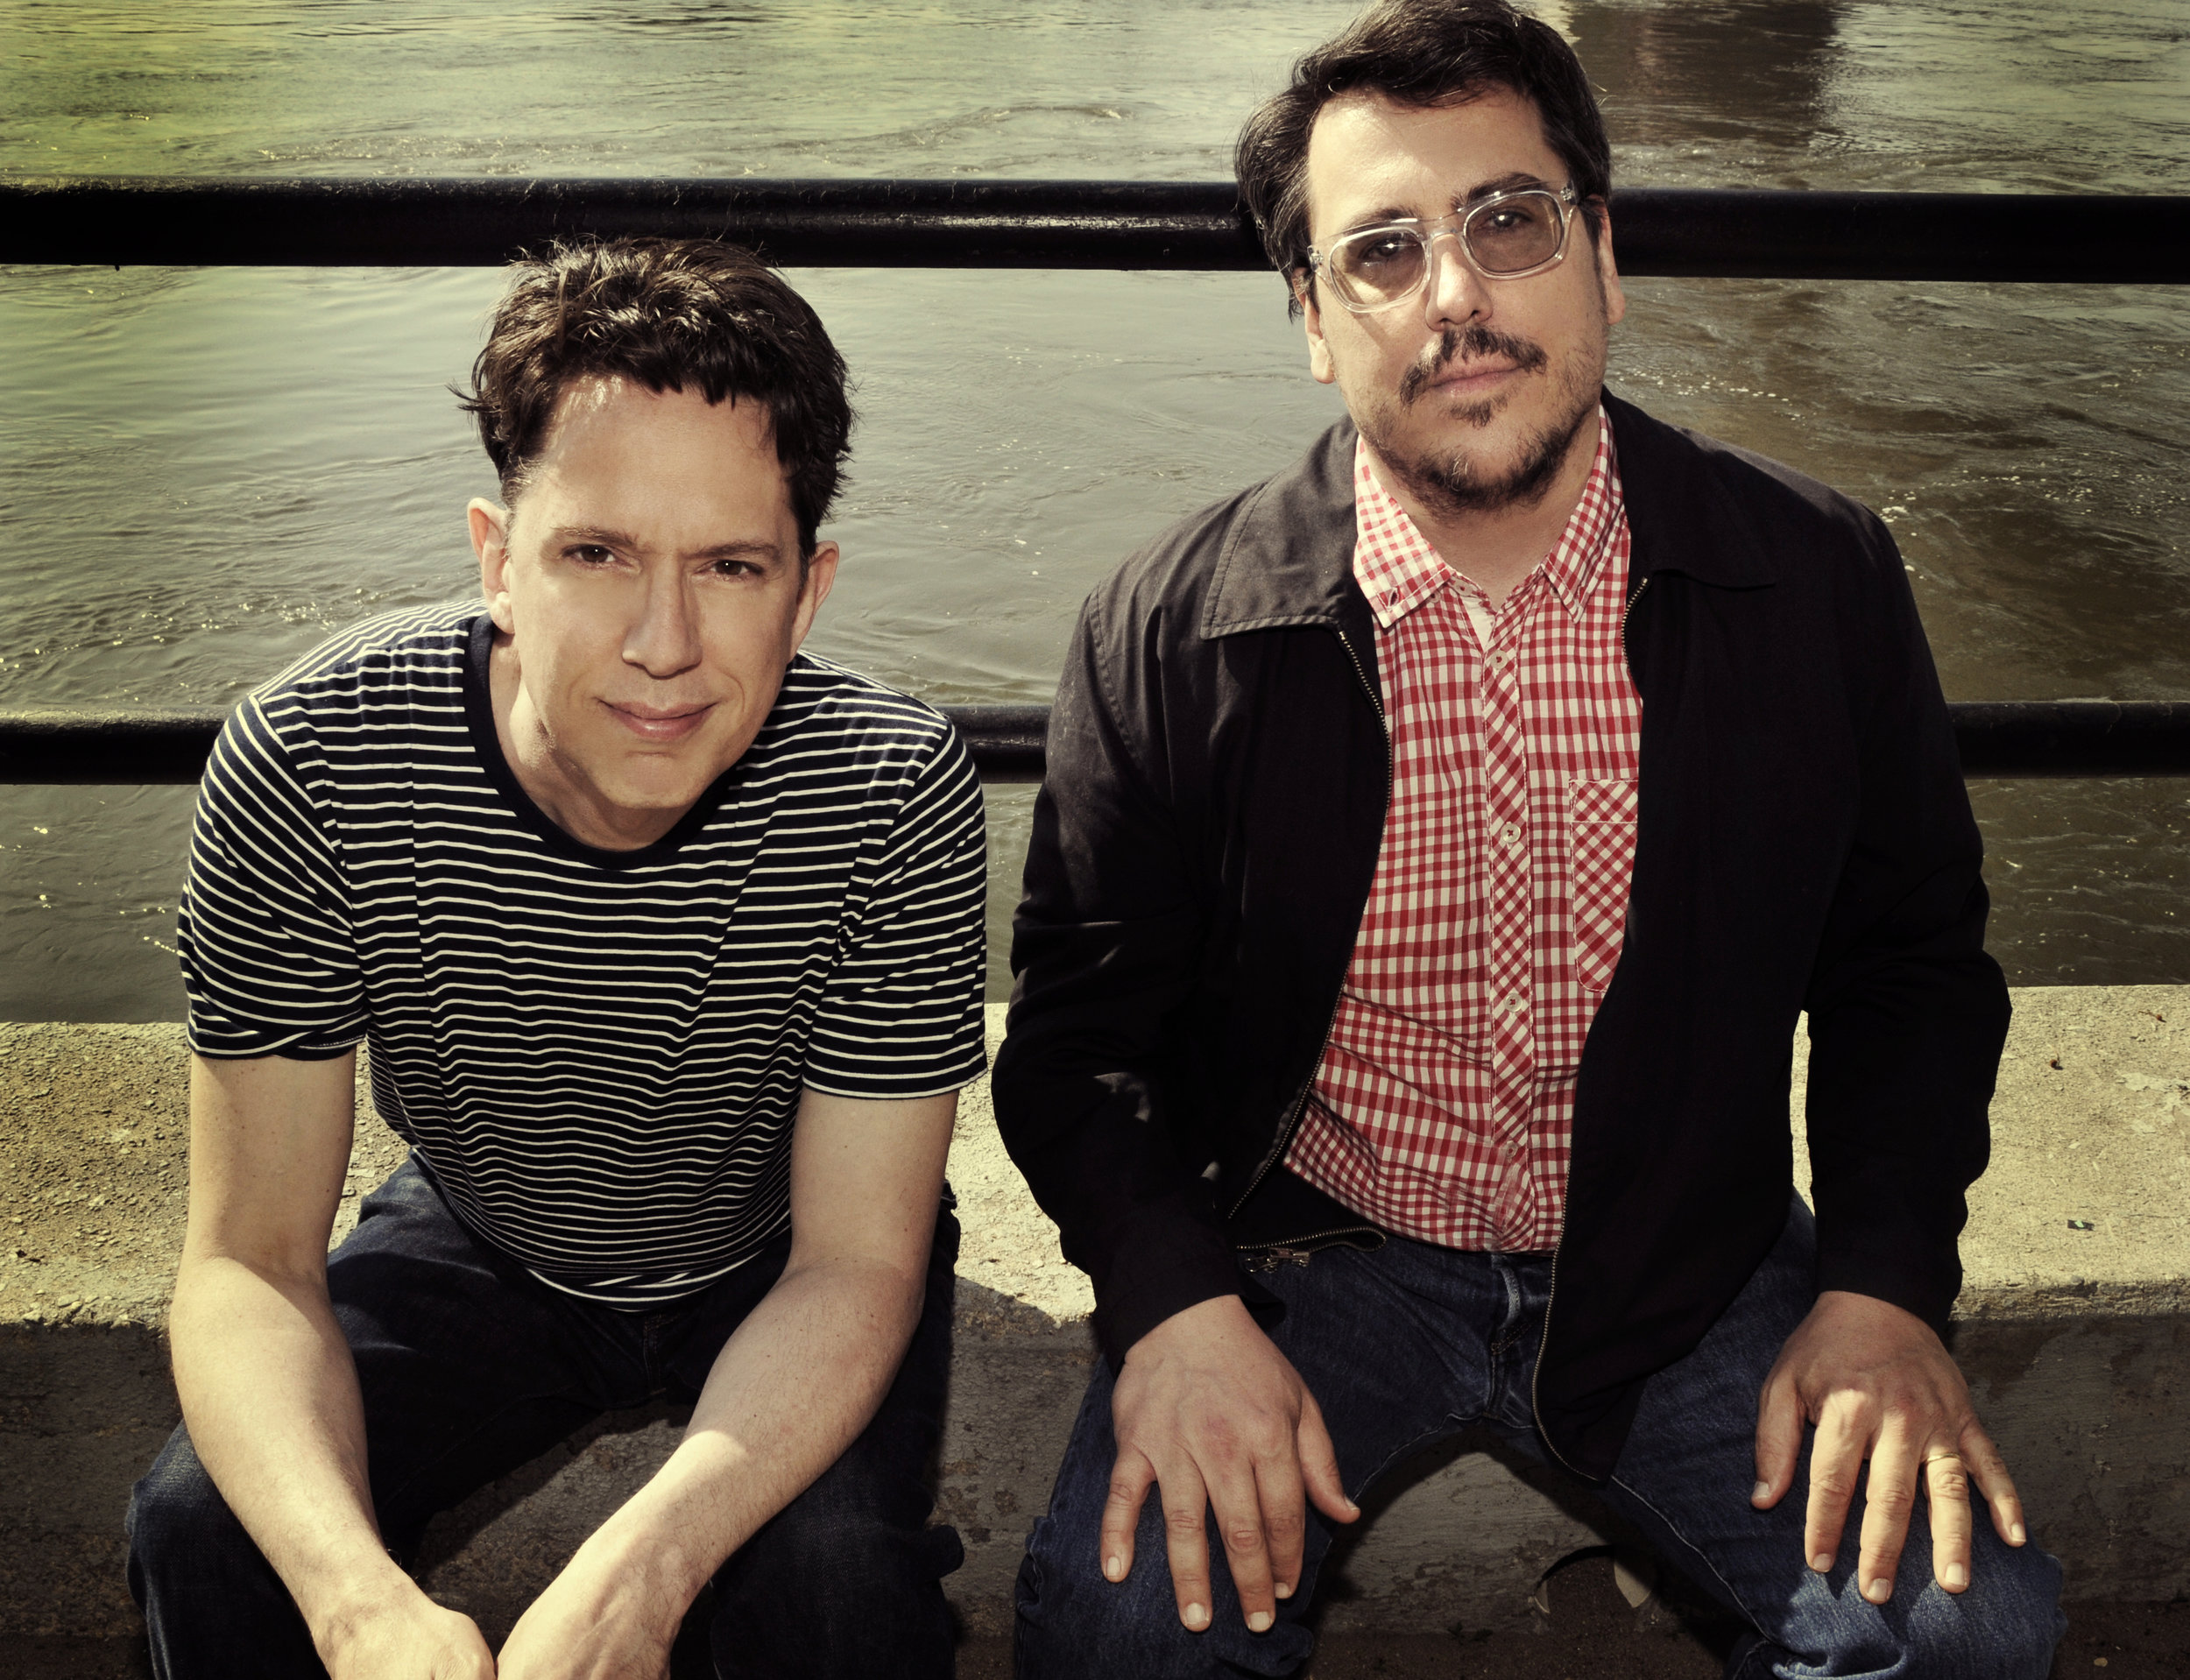 TMBG Promo Photo! — They Might Be Giants